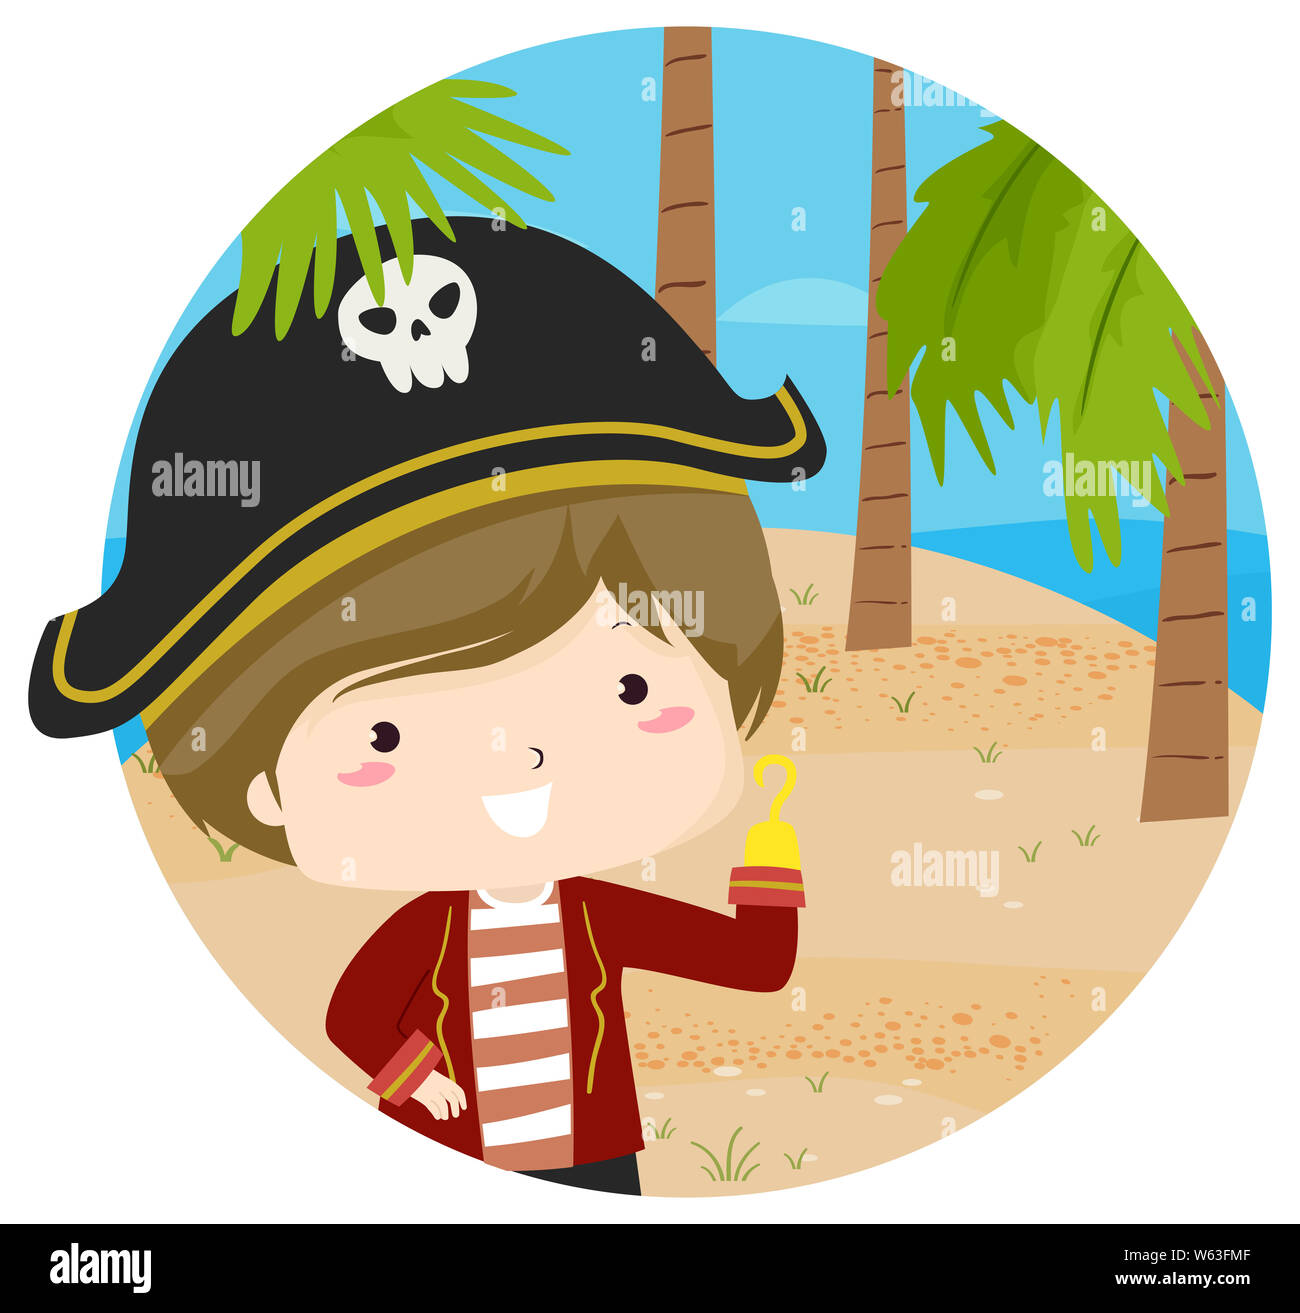 https://c8.alamy.com/comp/W63FMF/illustration-of-a-kid-boy-pirate-with-a-hand-hook-with-tropical-island-behind-W63FMF.jpg